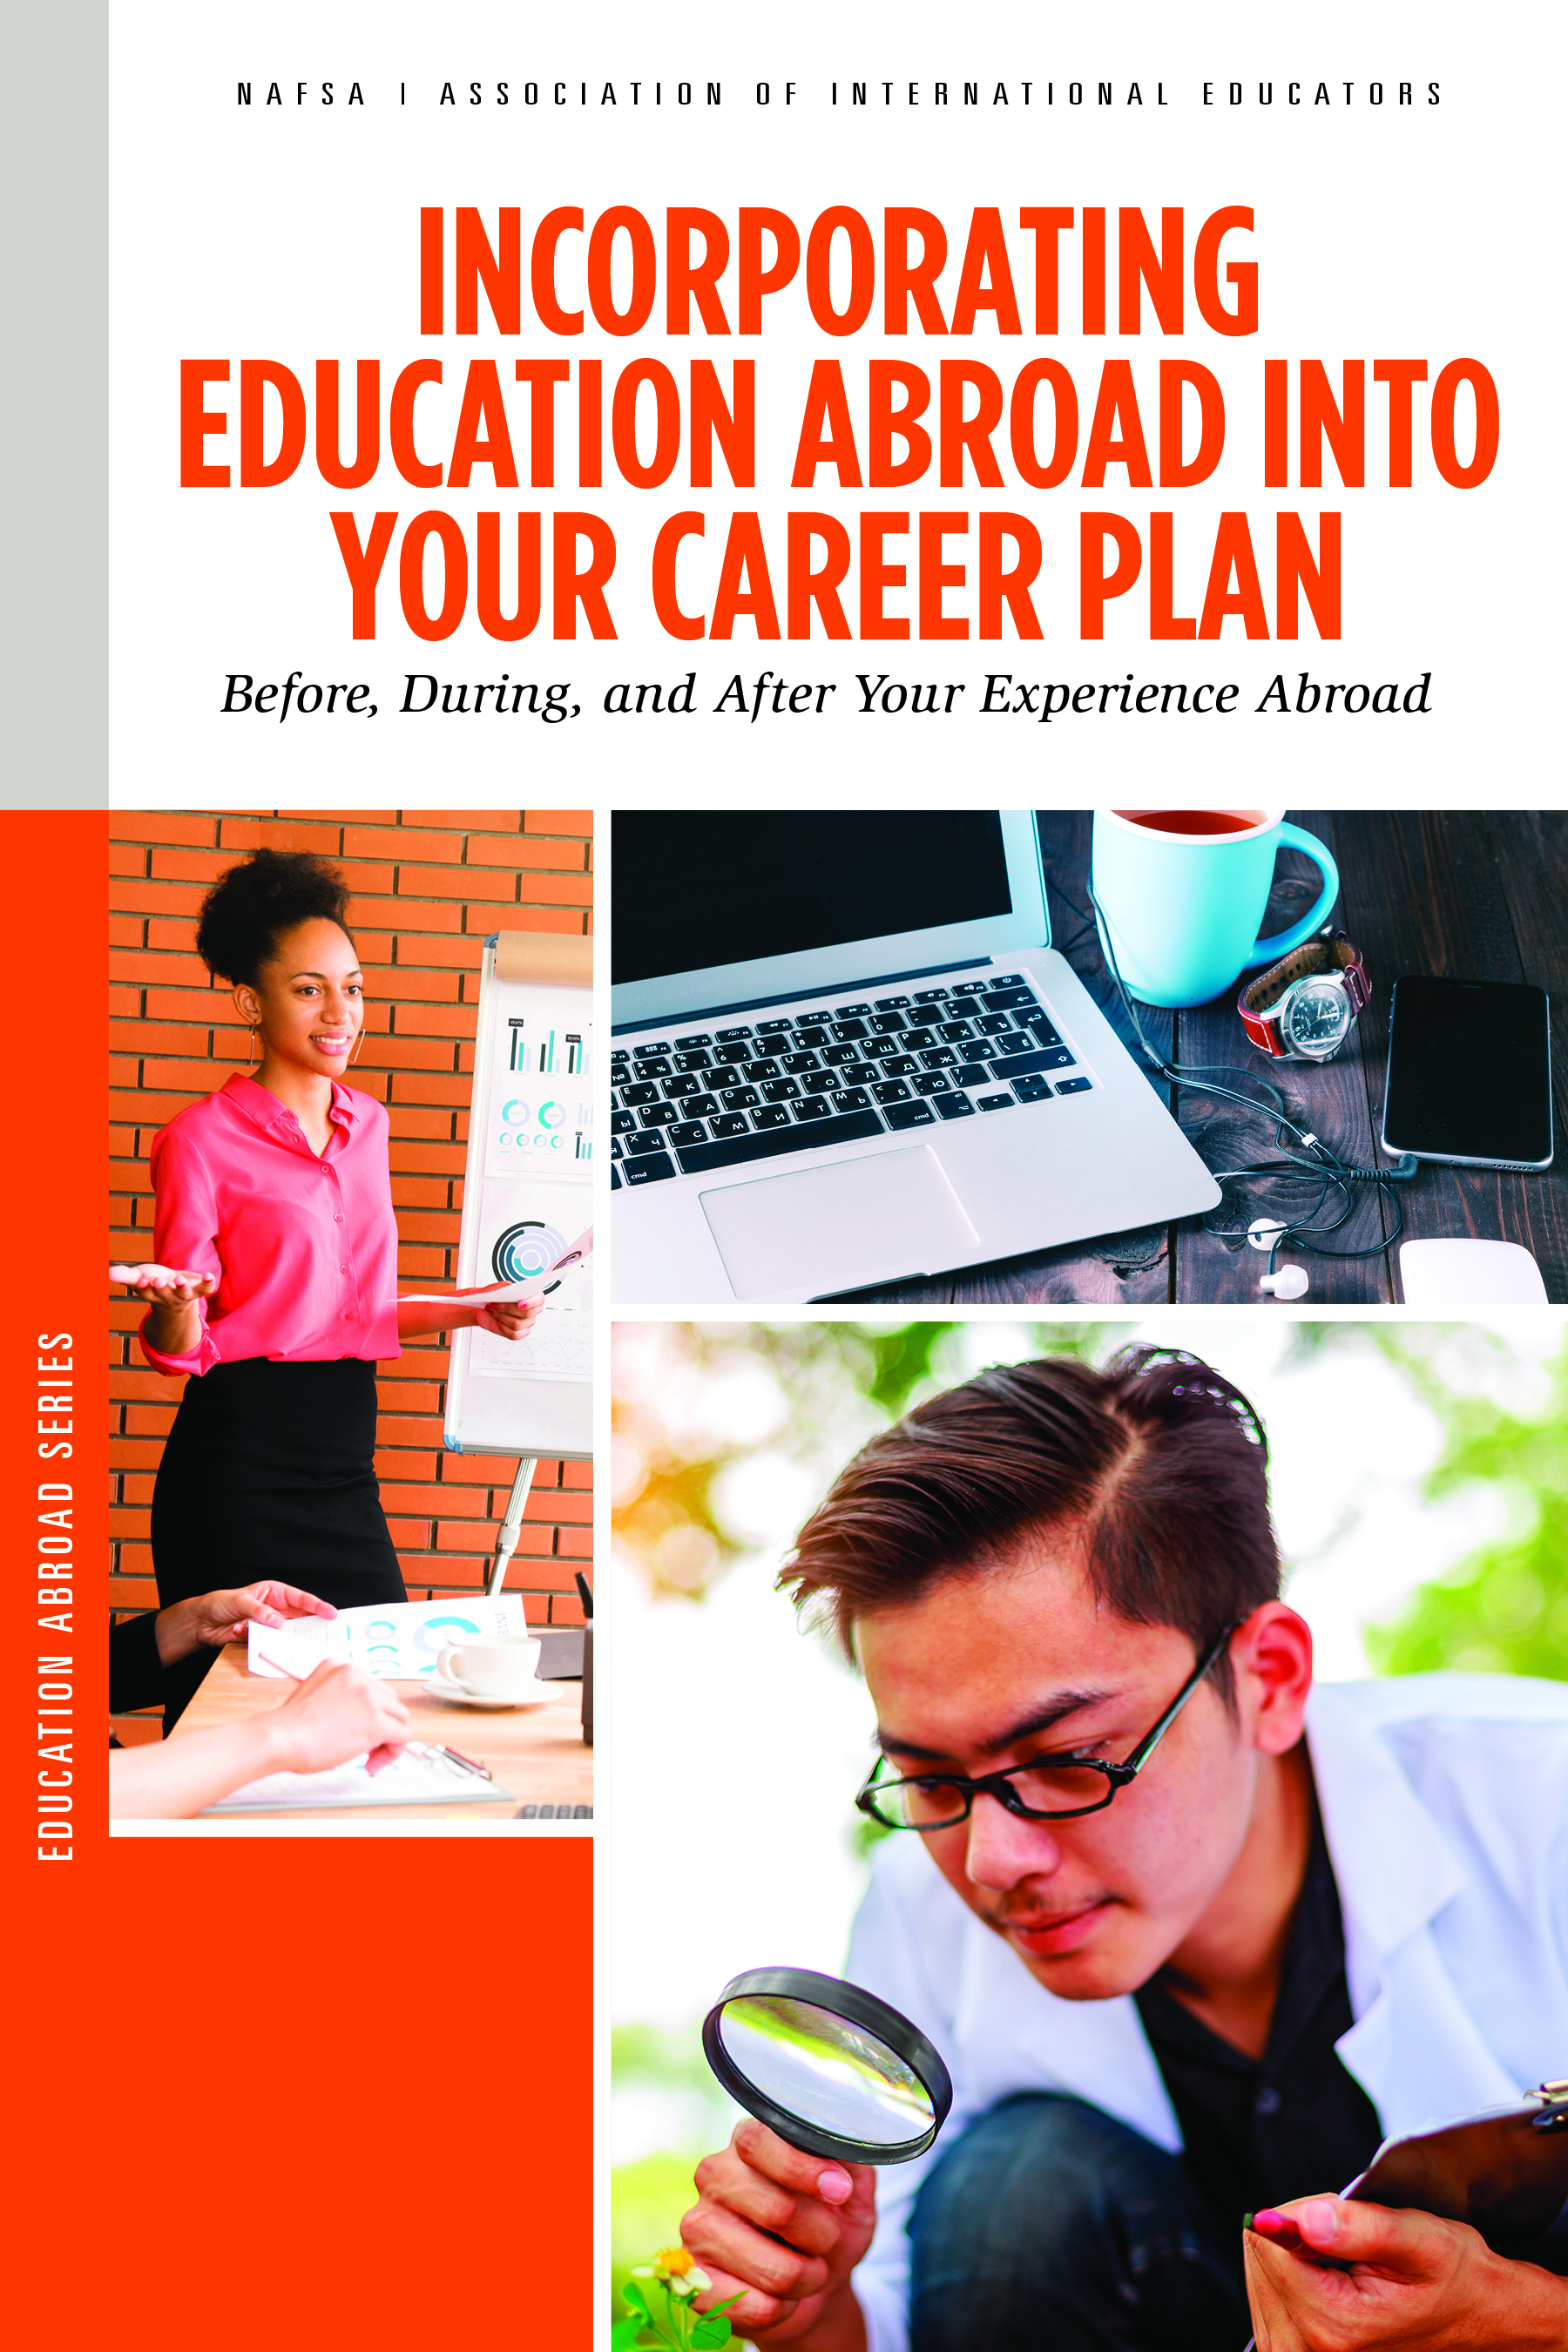 Cover of incorporating education abroad into your career plan.